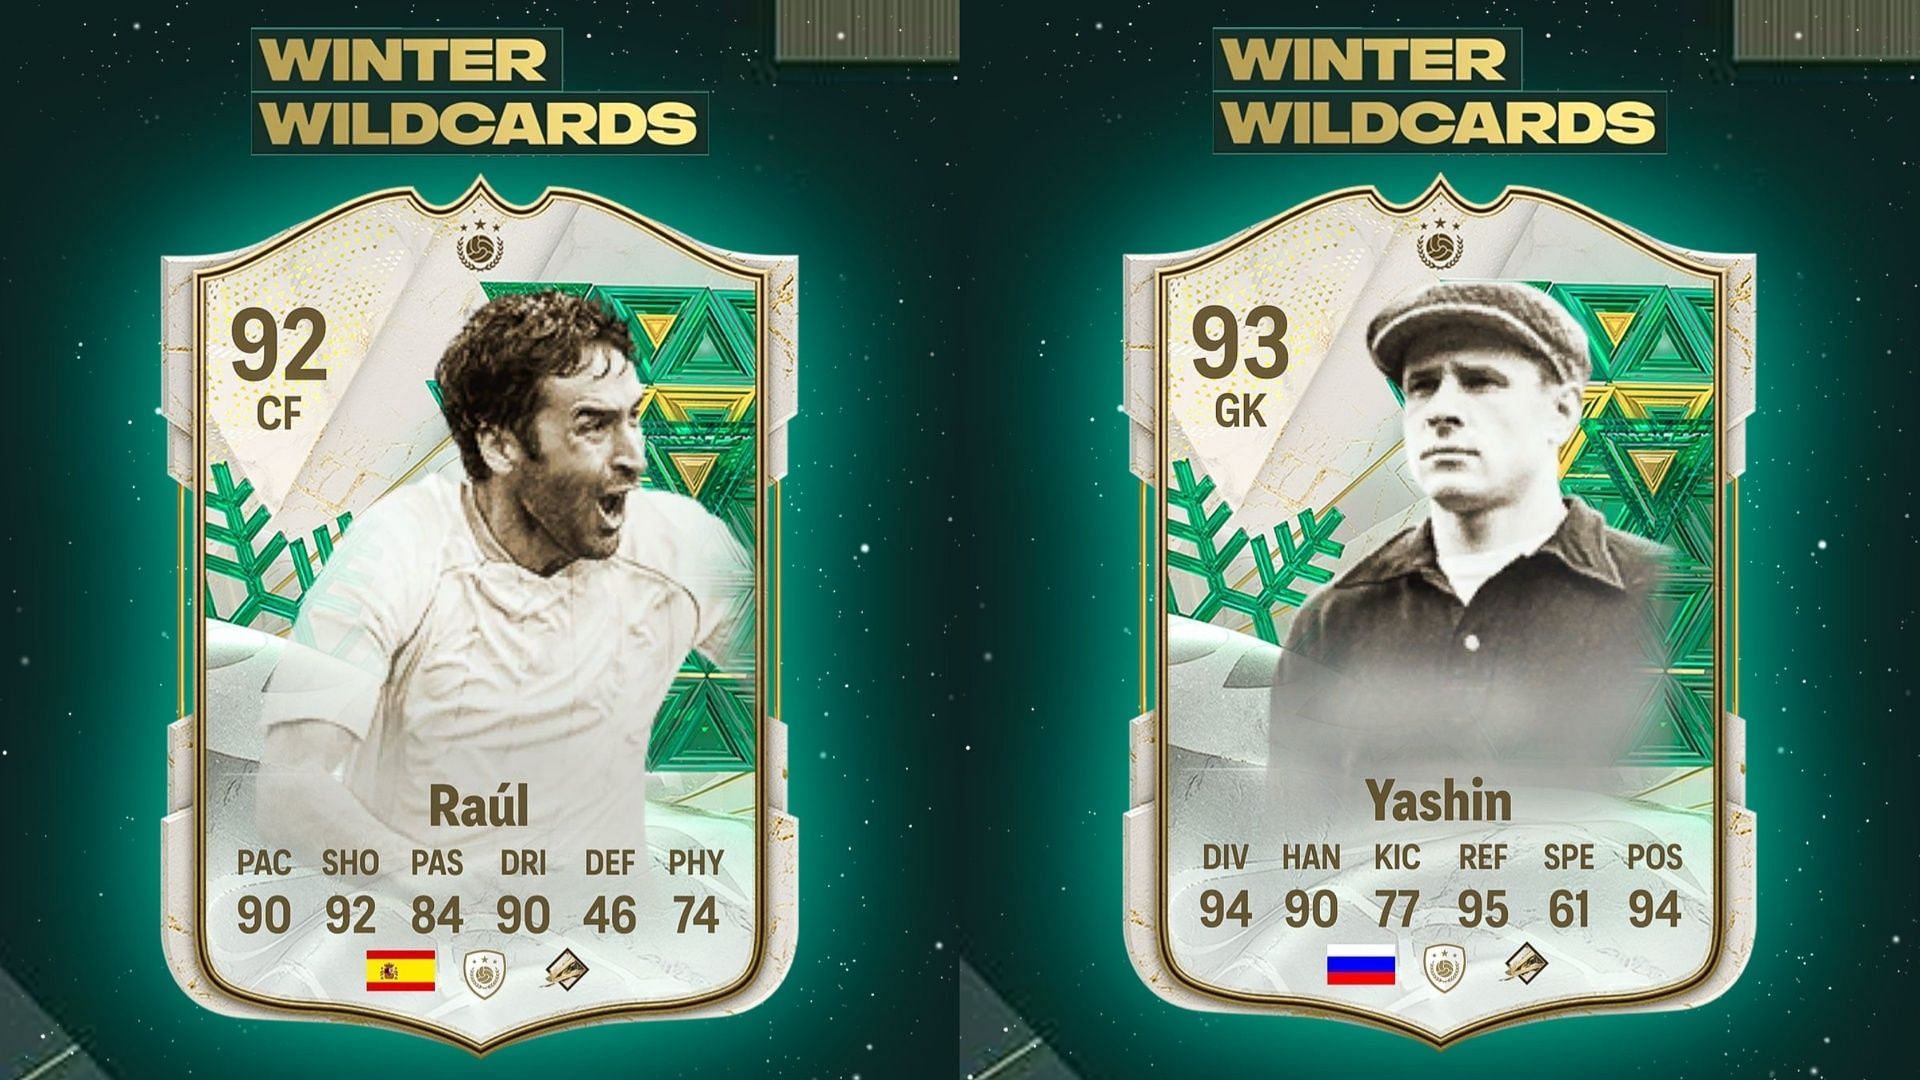 All EA FC 24 Winter Wildcards Icons leaks featuring Lev Yashin